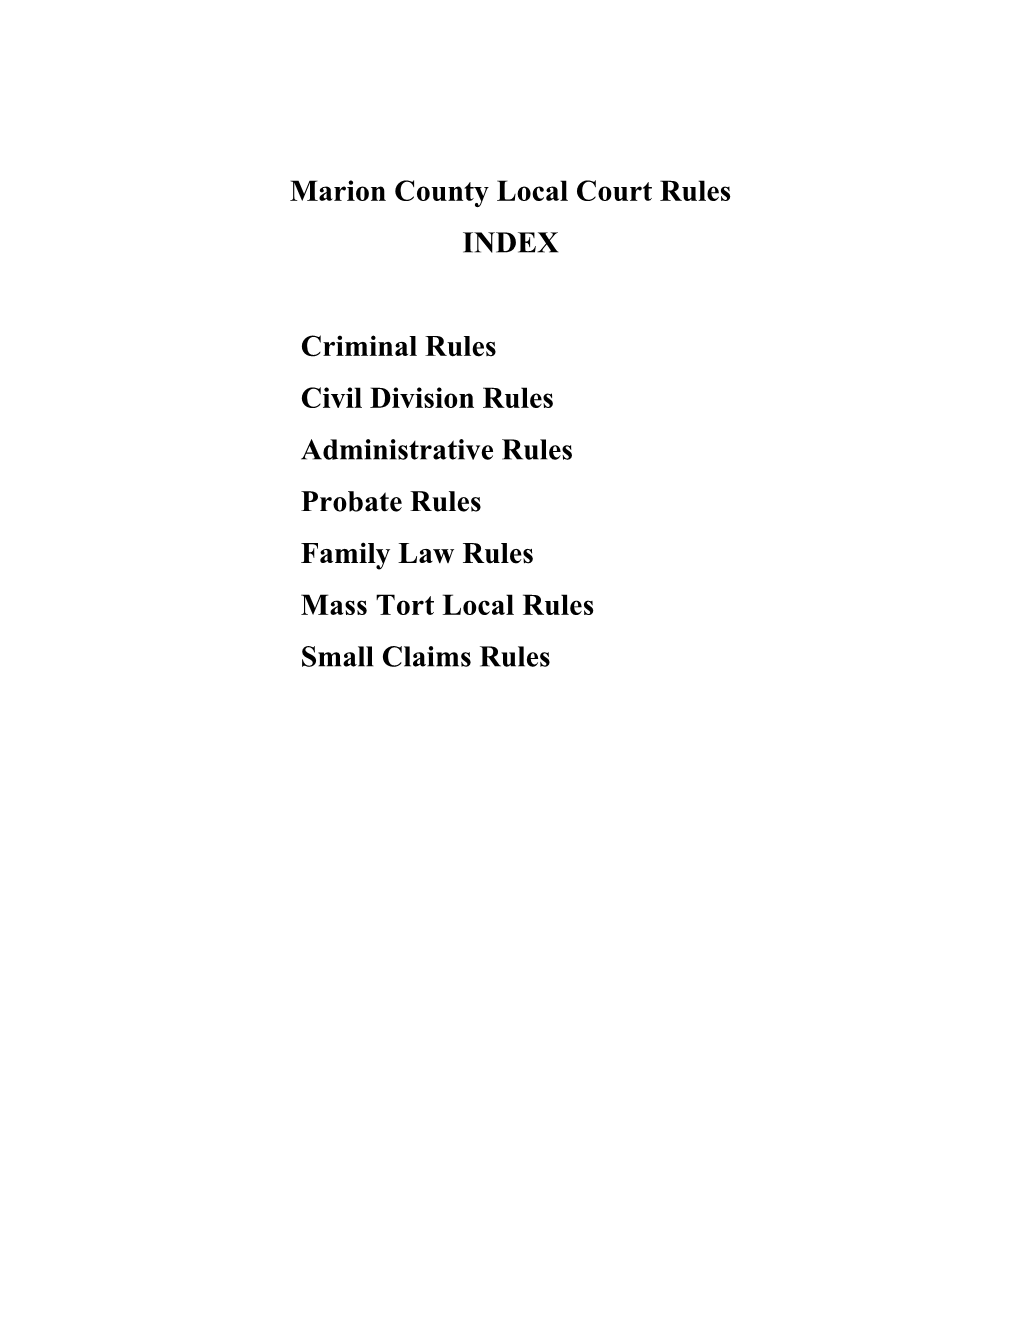 Marion County Local Court Rules INDEX Criminal Rules Civil Division